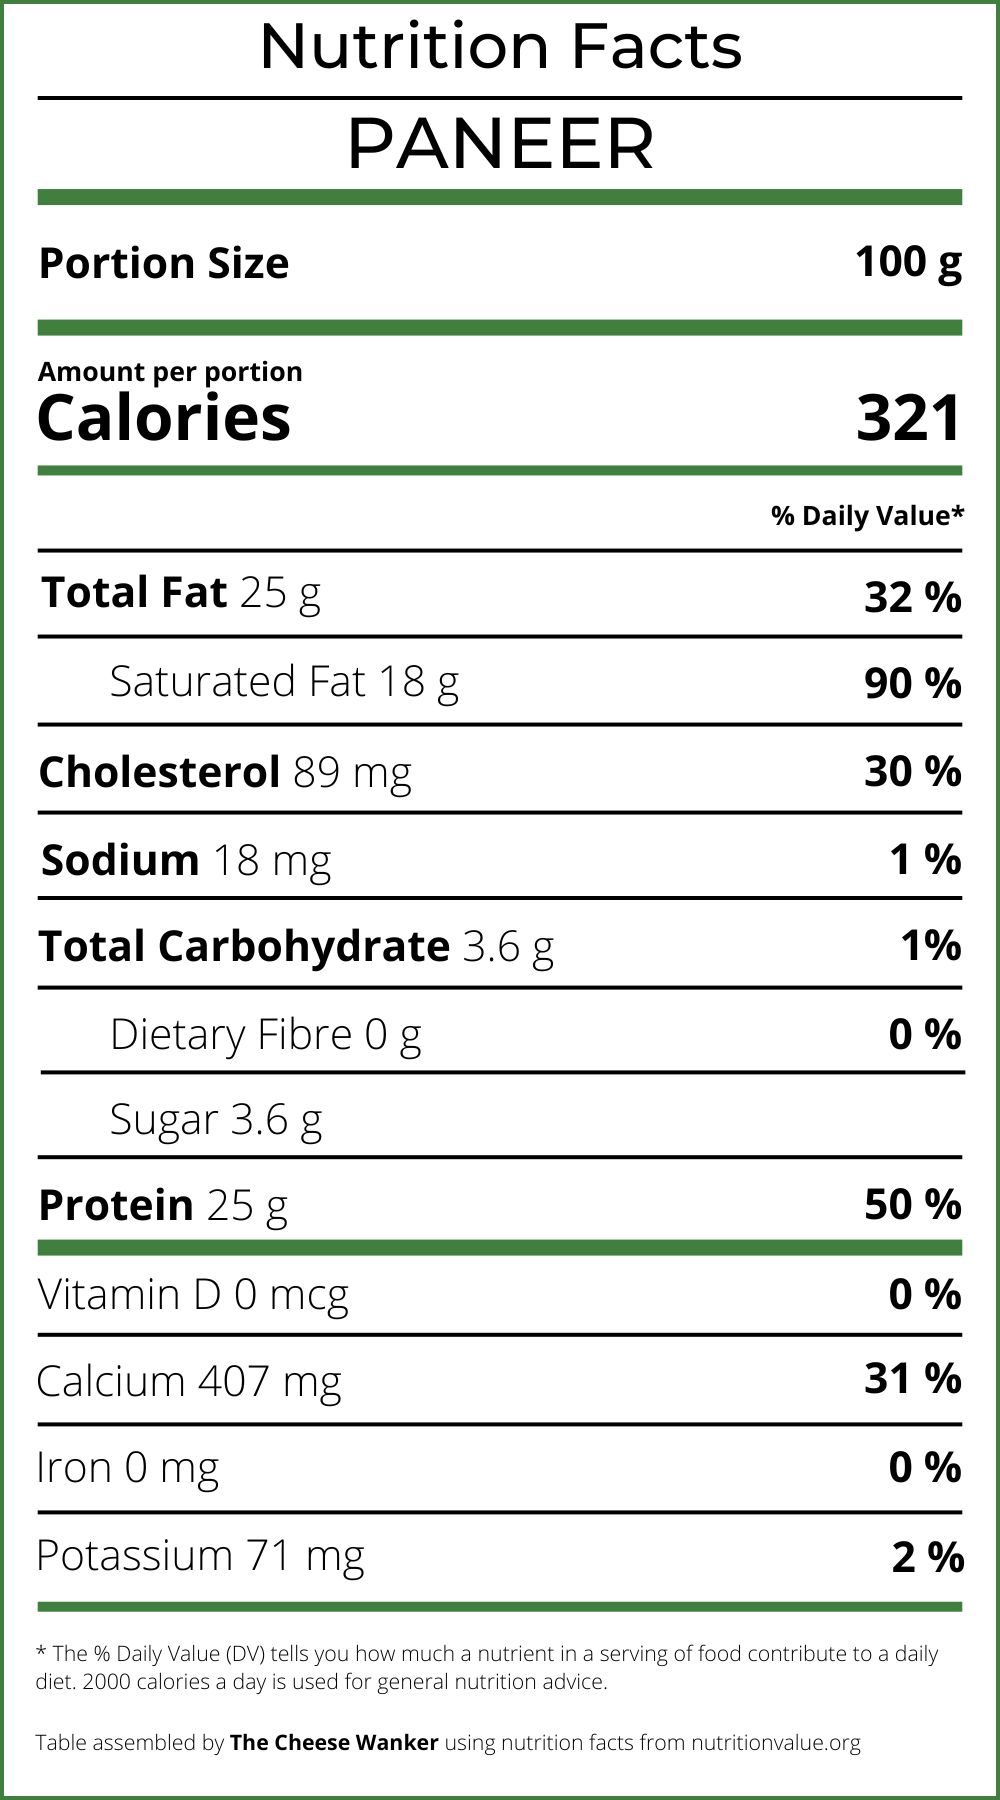 Nutrition Facts Paneer